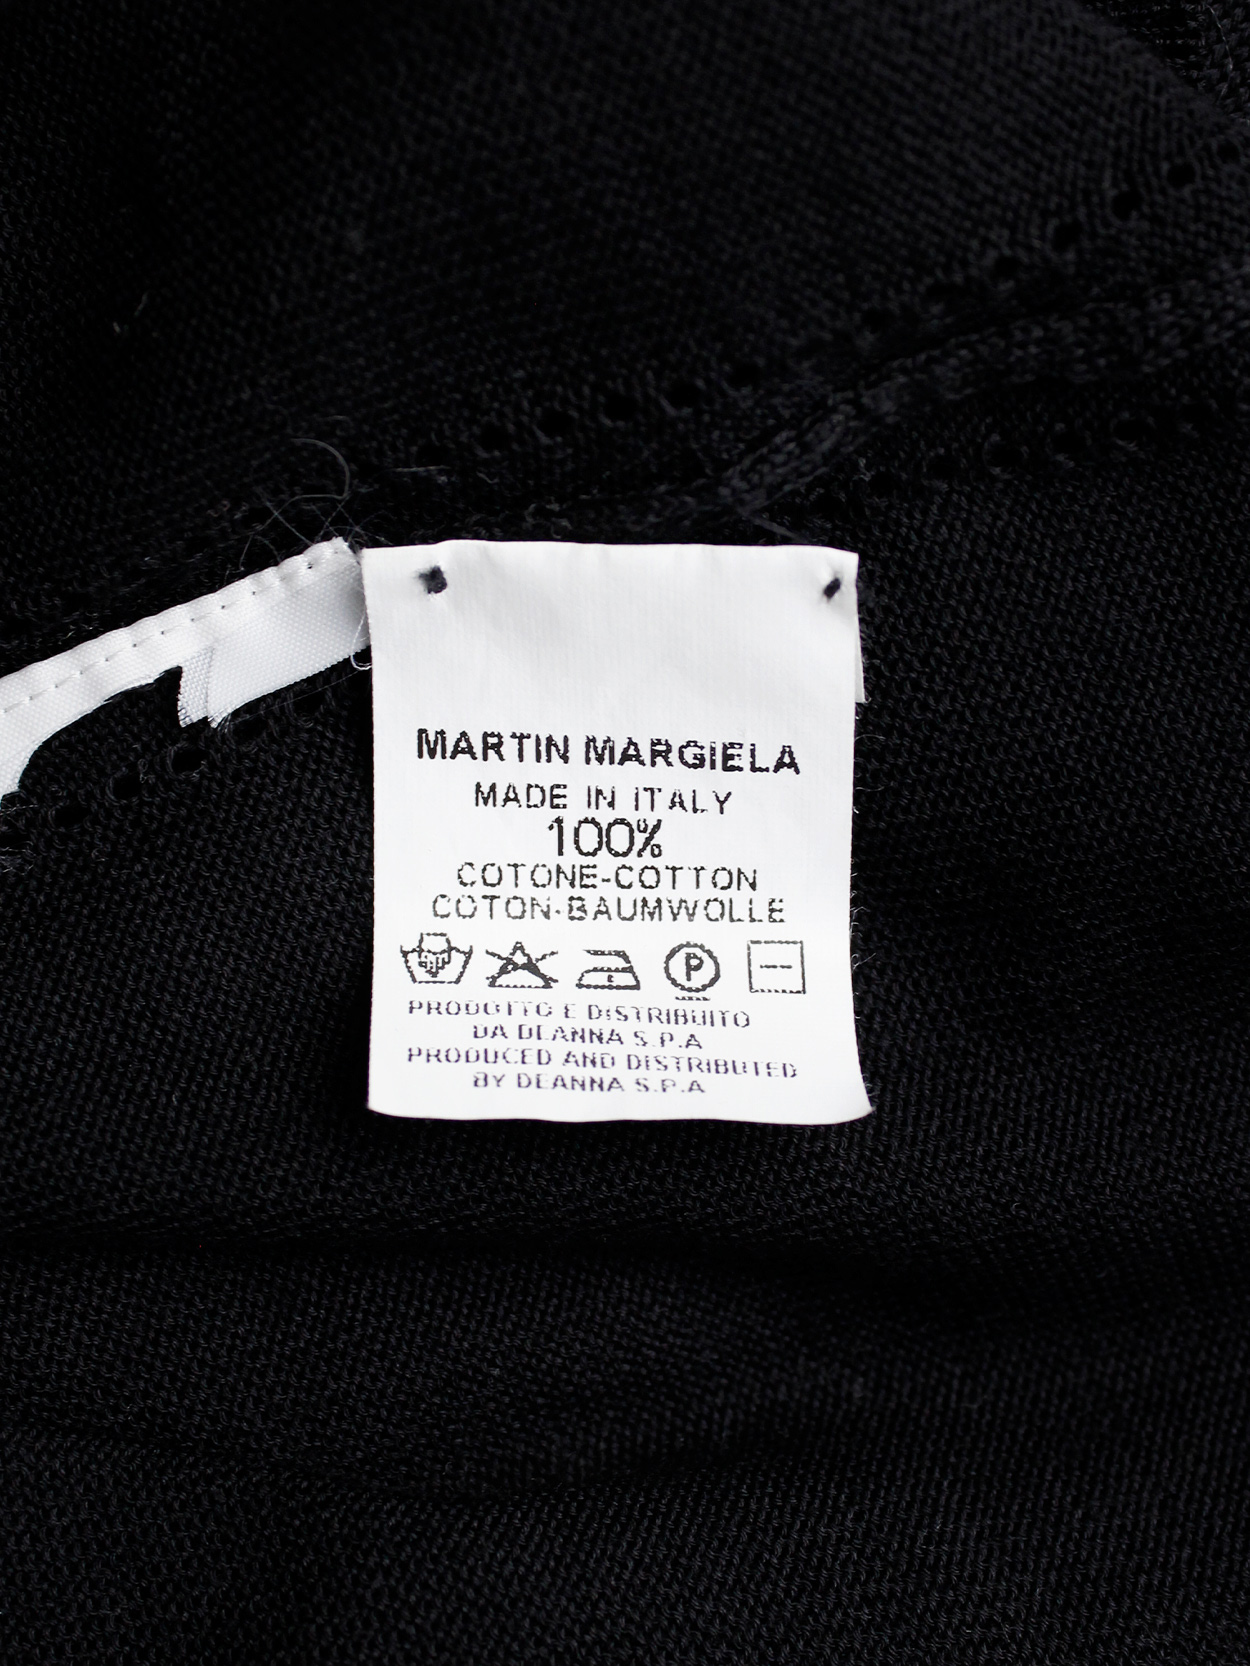 Maison Martin Margiela black t-shirt with cut open sleeves and hanging ...